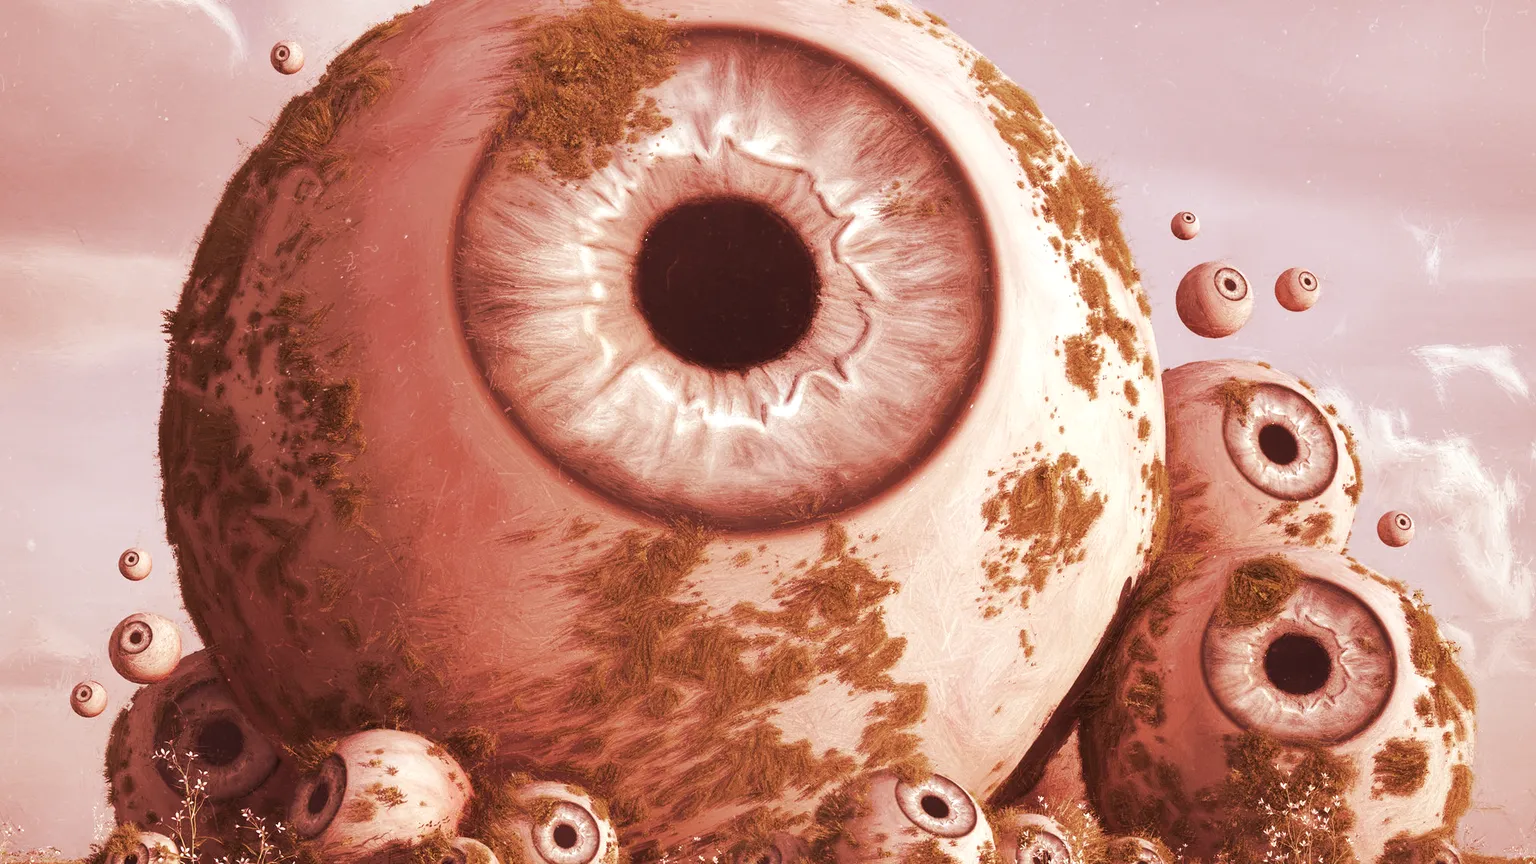 "Organic Reach" artwork from artist Beeple (cropped). Image: Beeple